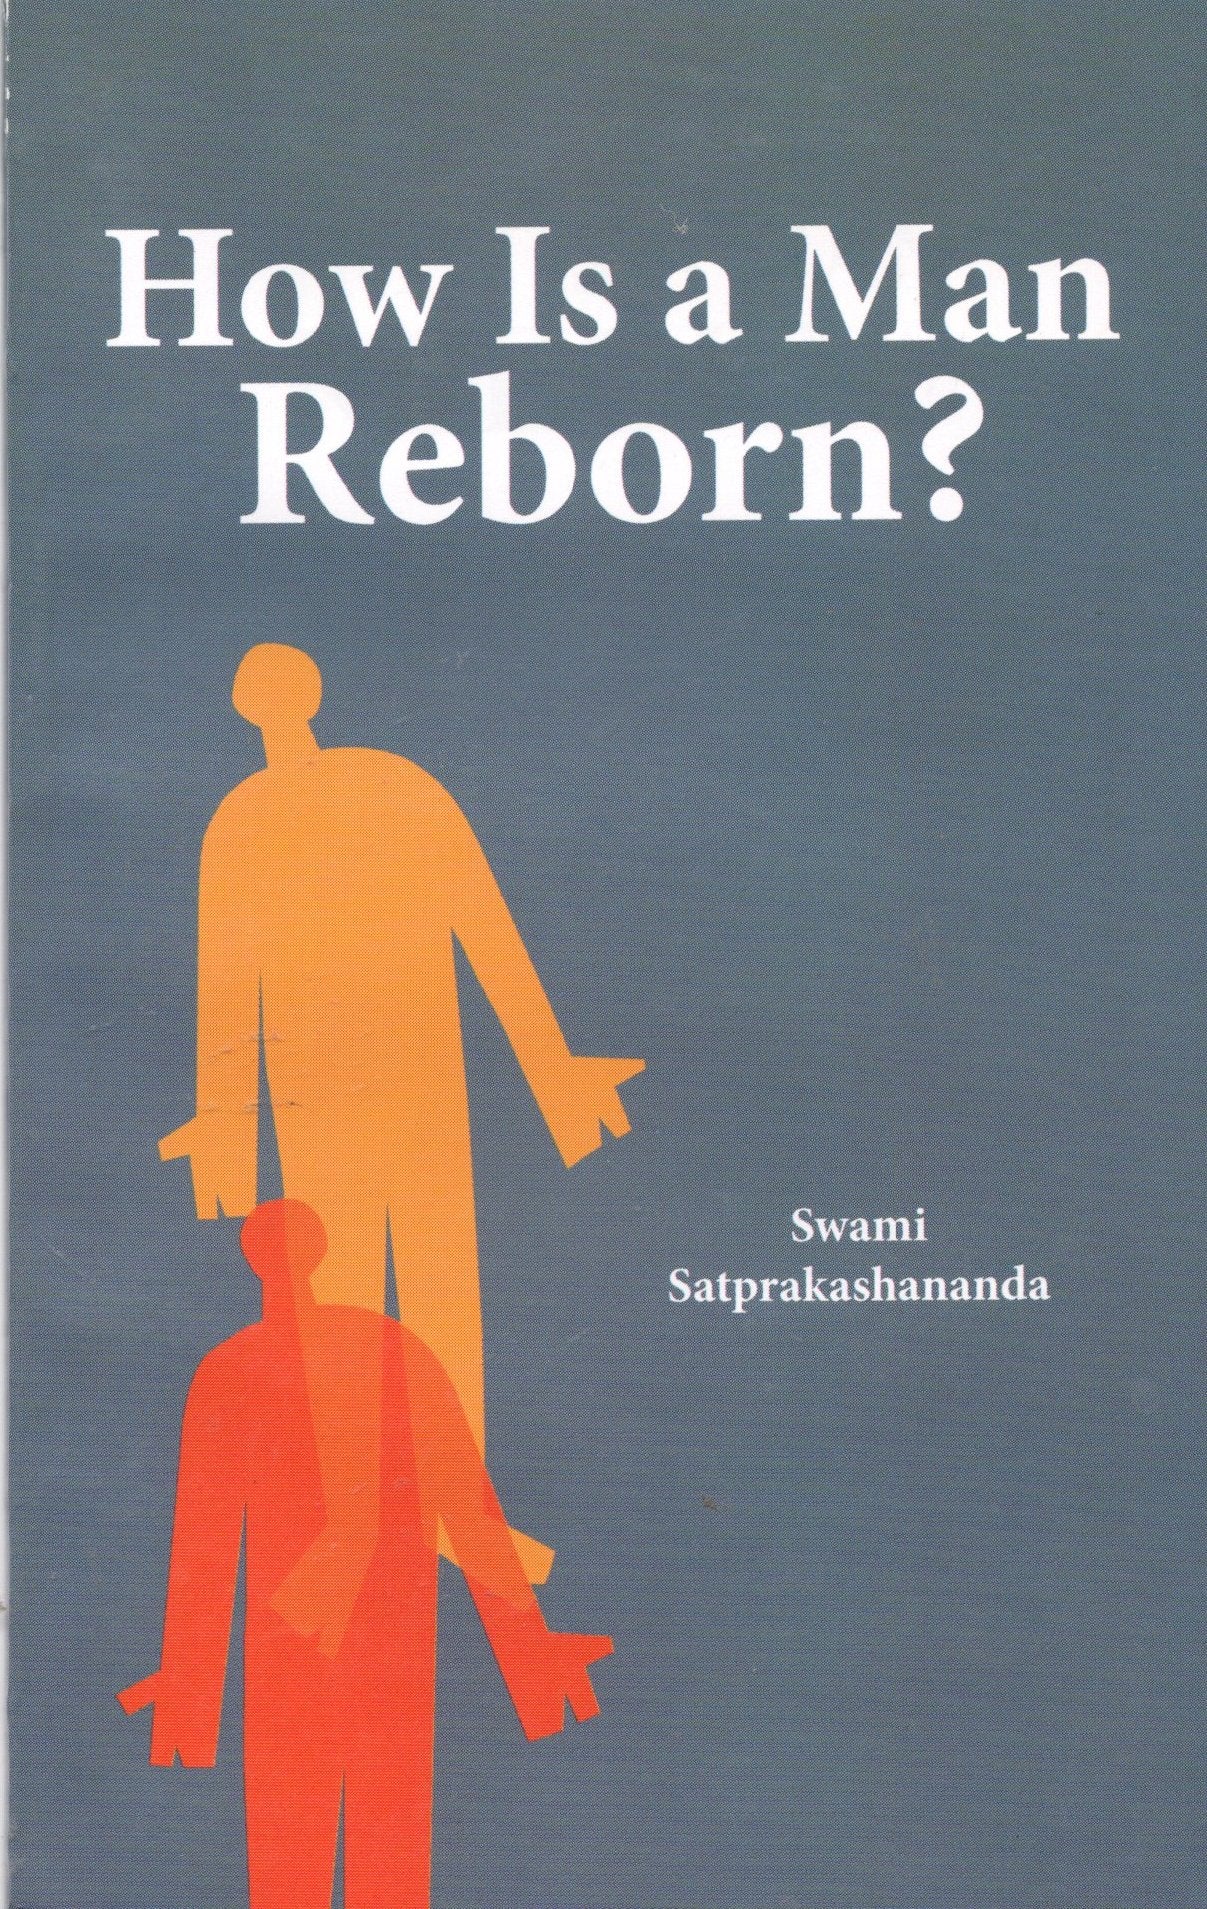 How Is a Man Reborn?